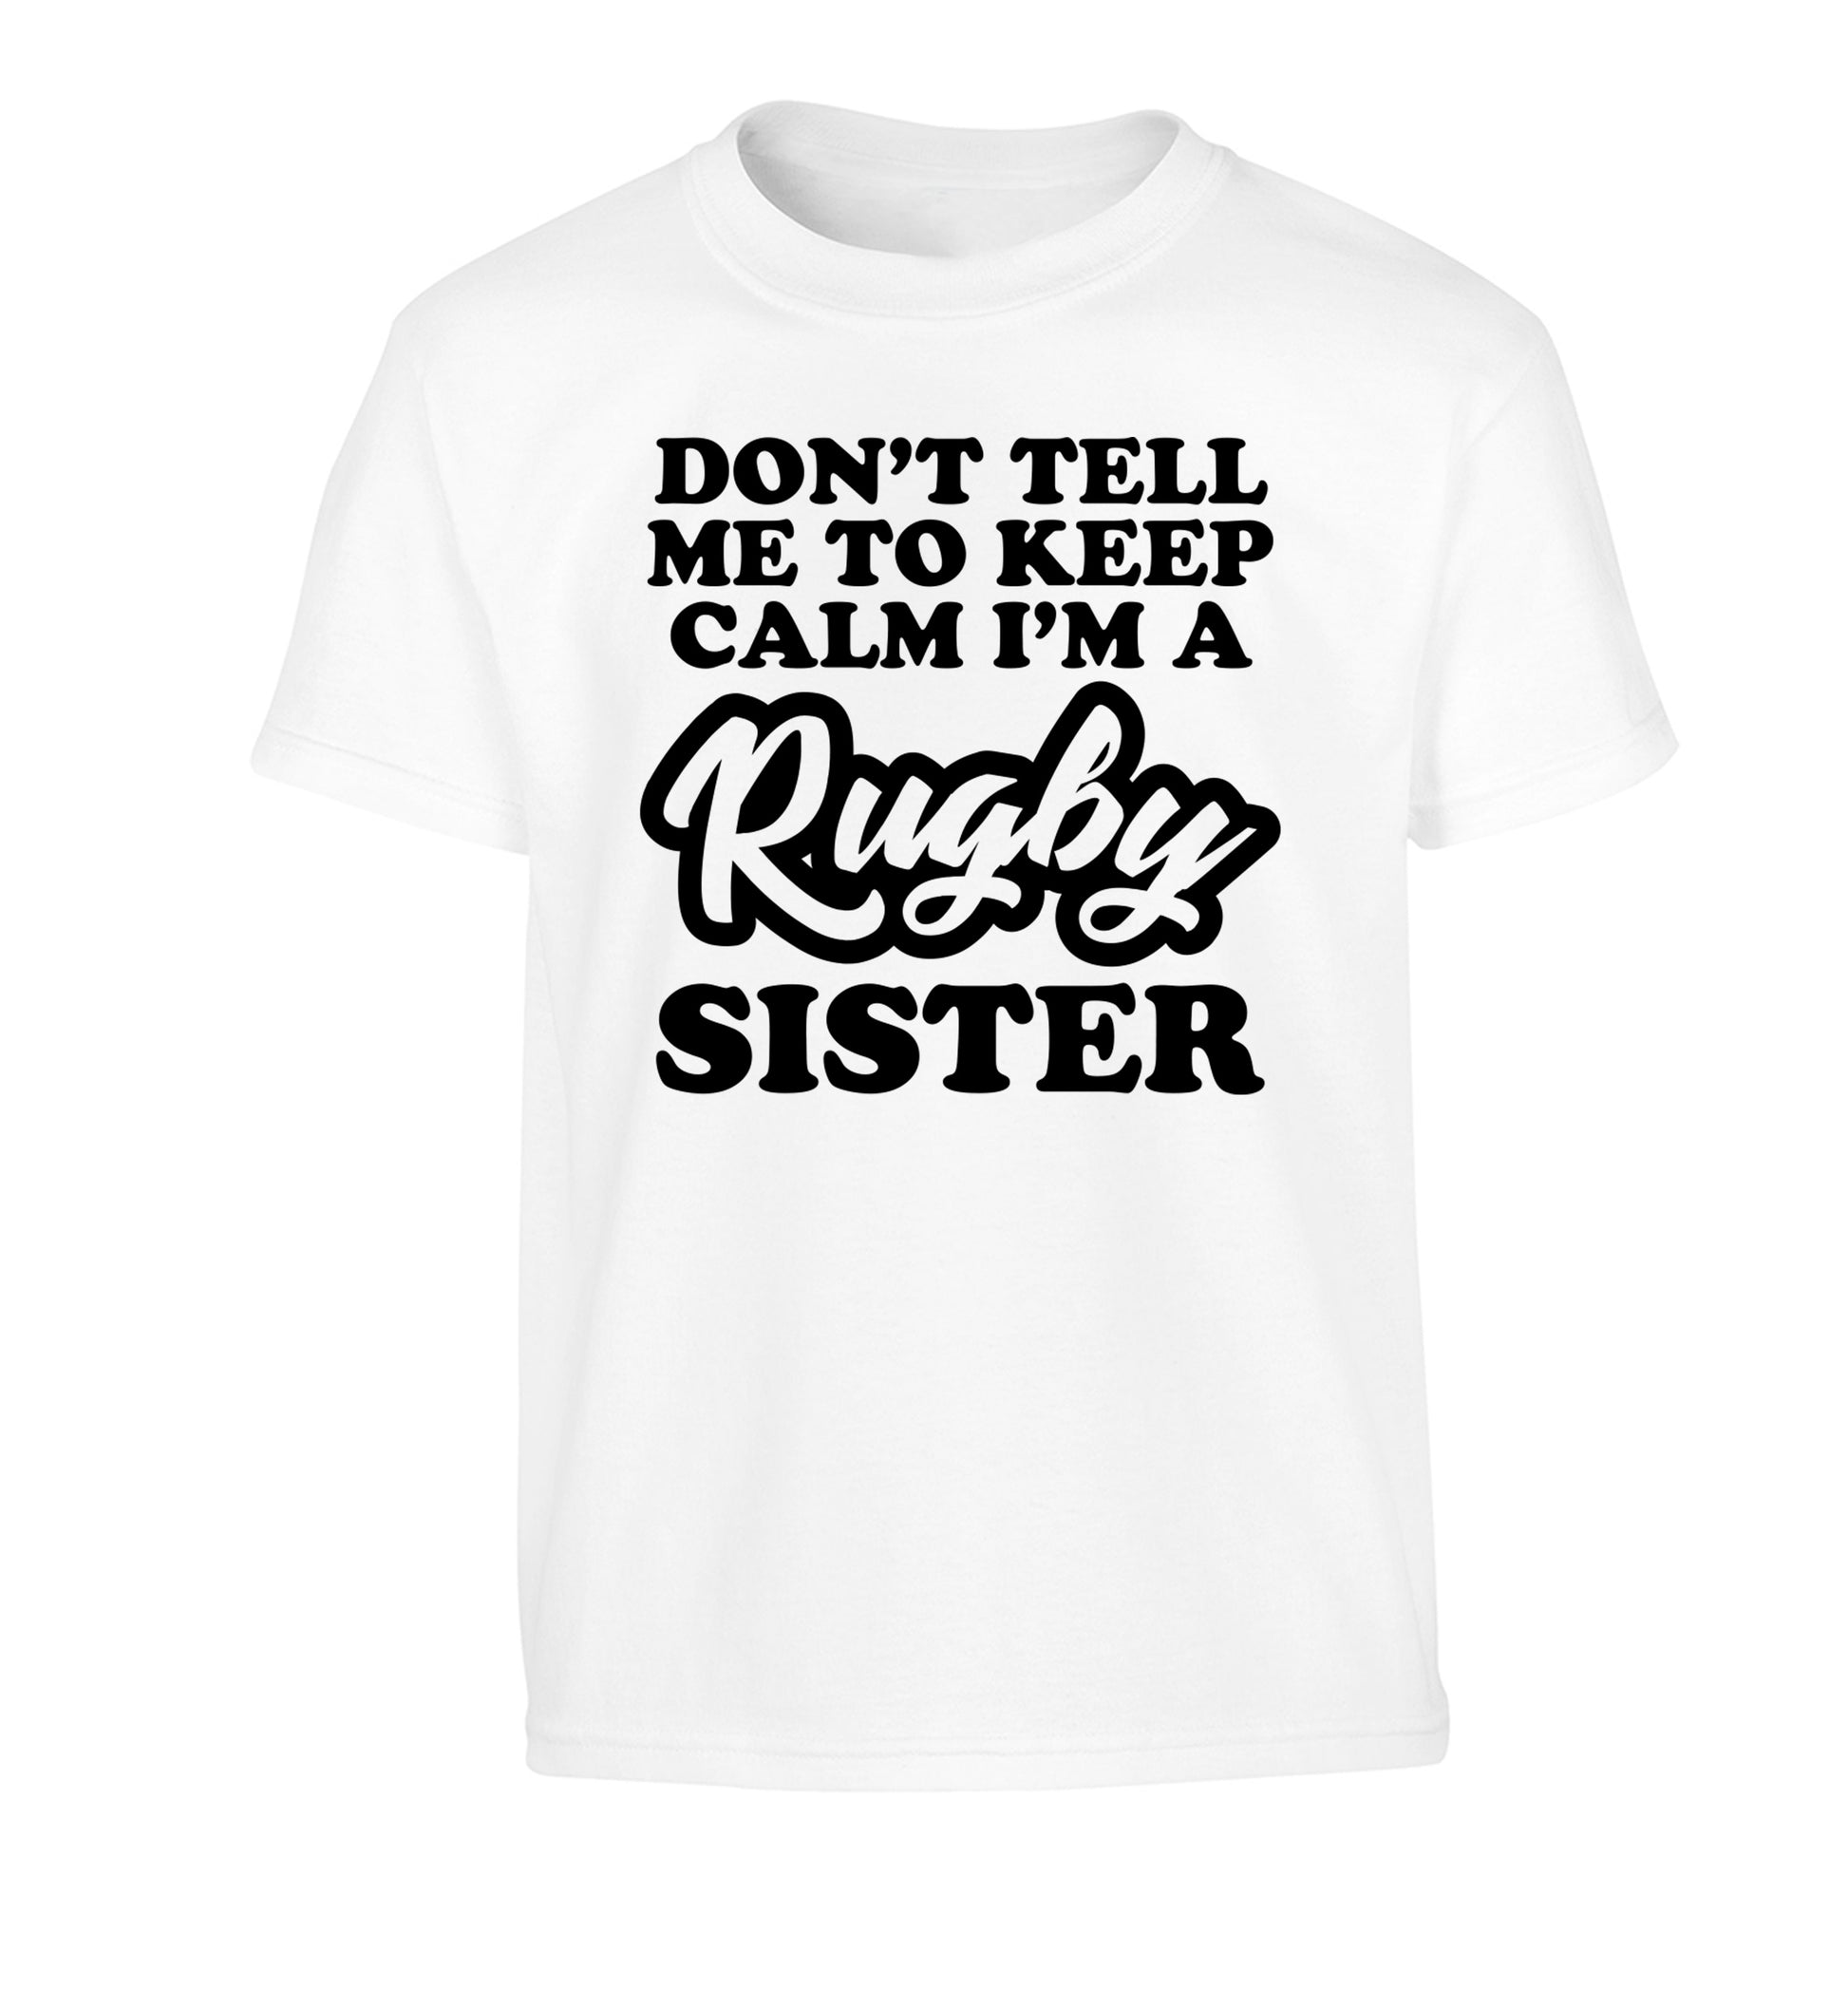 Don't tell me keep calm I'm a rugby sister Children's white Tshirt 12-13 Years